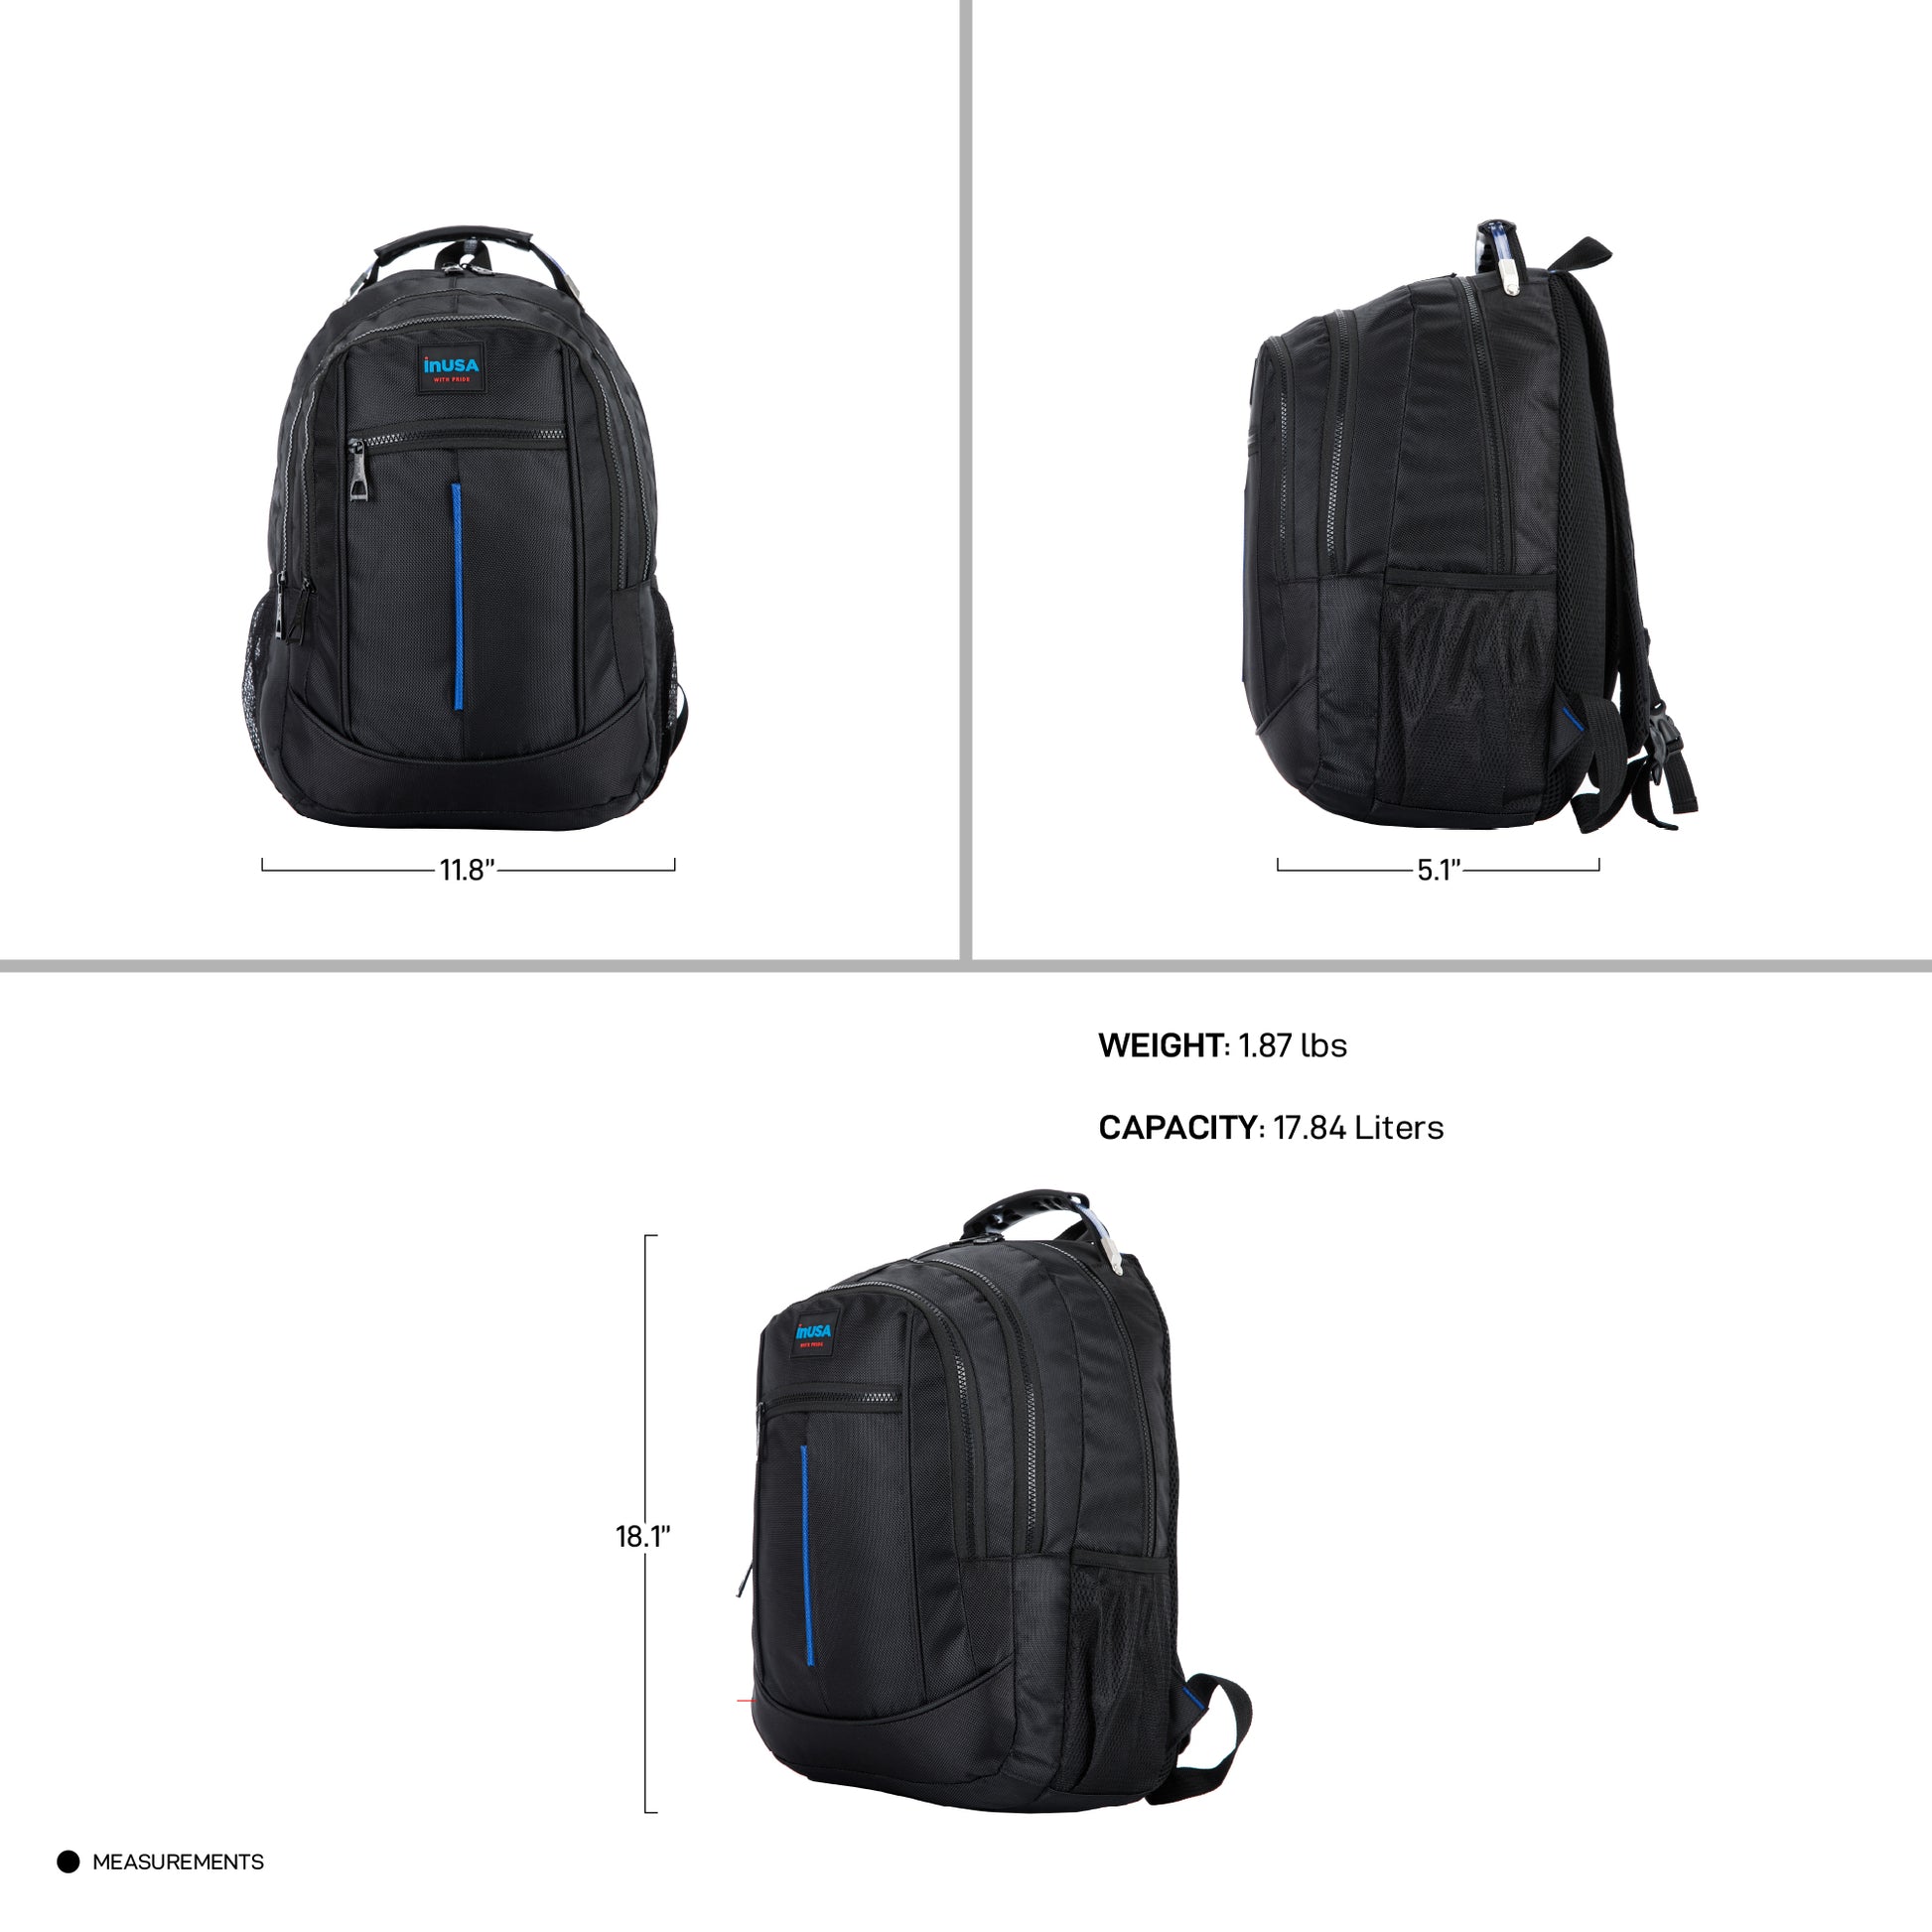 InUSA ROADSTER Executive 15.6-Inch Laptop Backpack